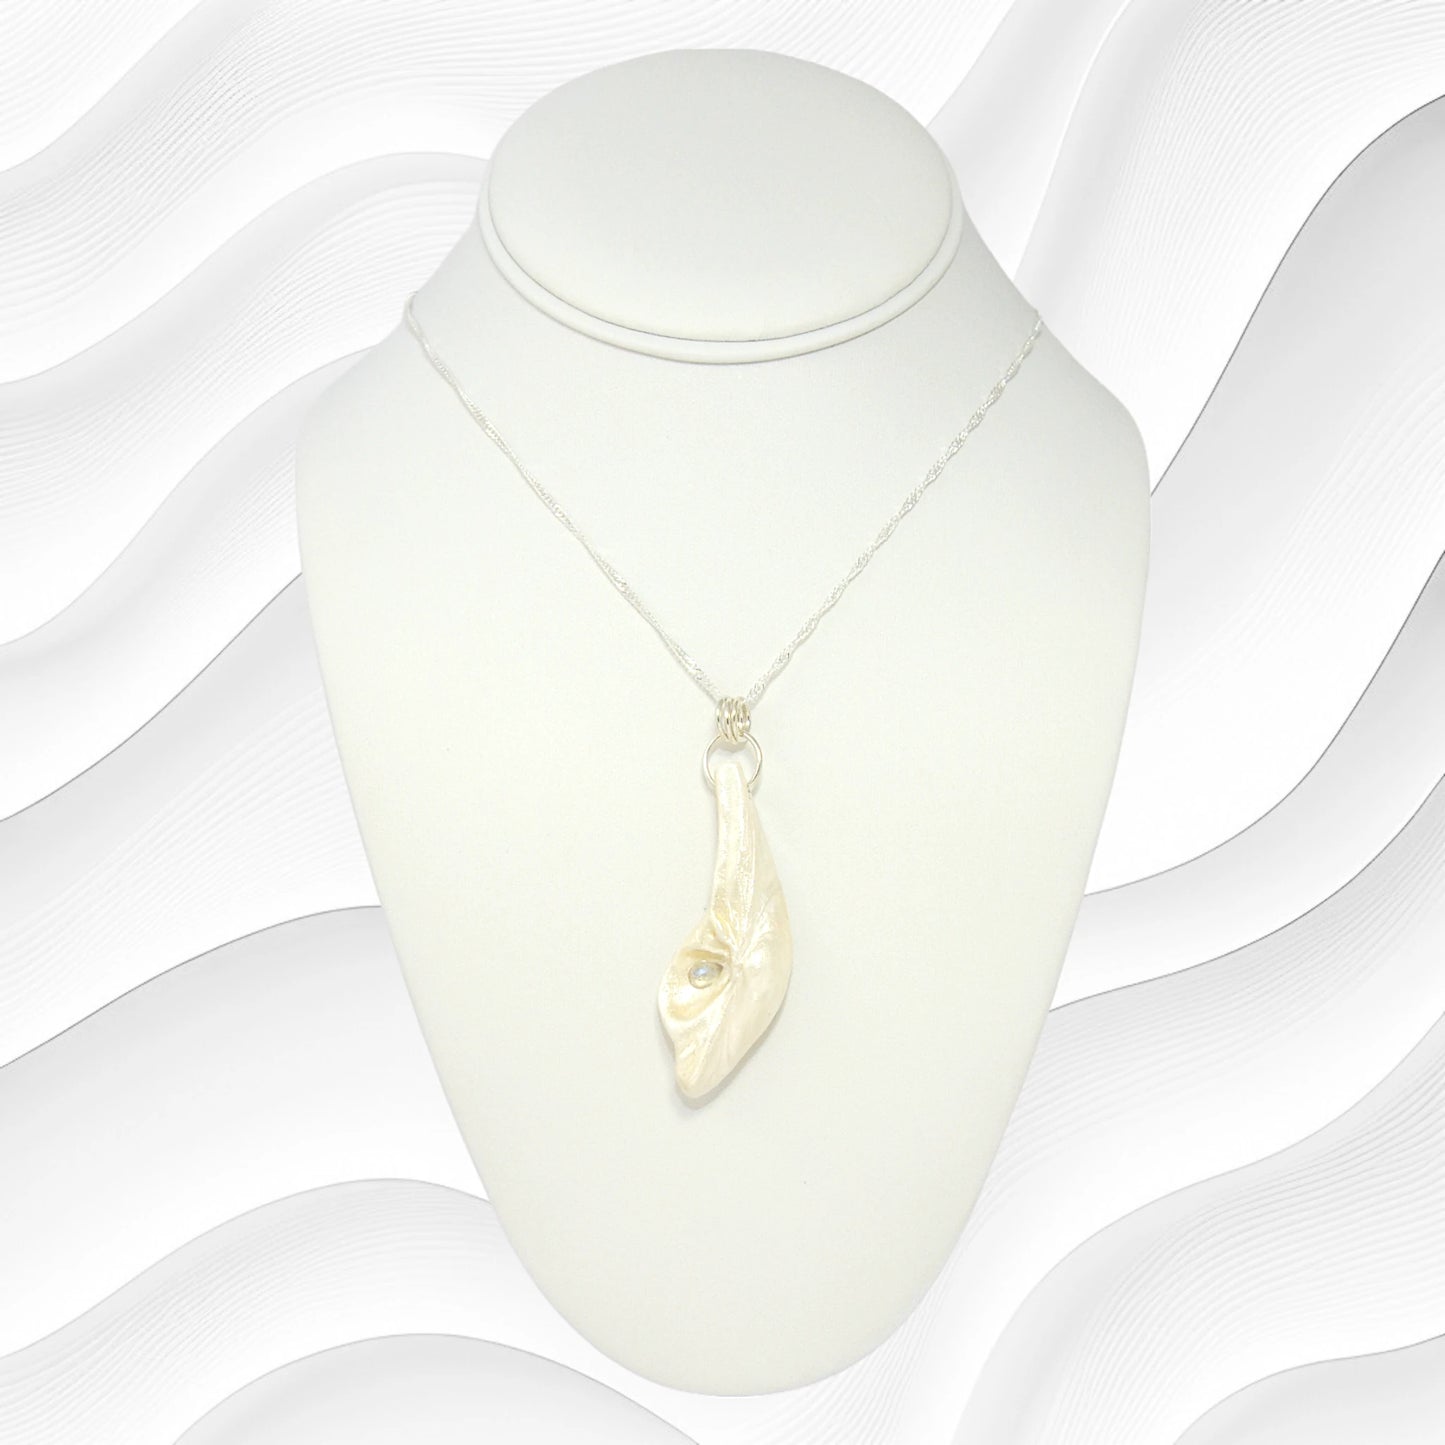 Cool Summer pendant made of natural seashell with a tear drop shape rose cut labradorite gemstone. The pendant is shown on a white necklace displayer hanging from a necklace.  The background is white wavy lines.